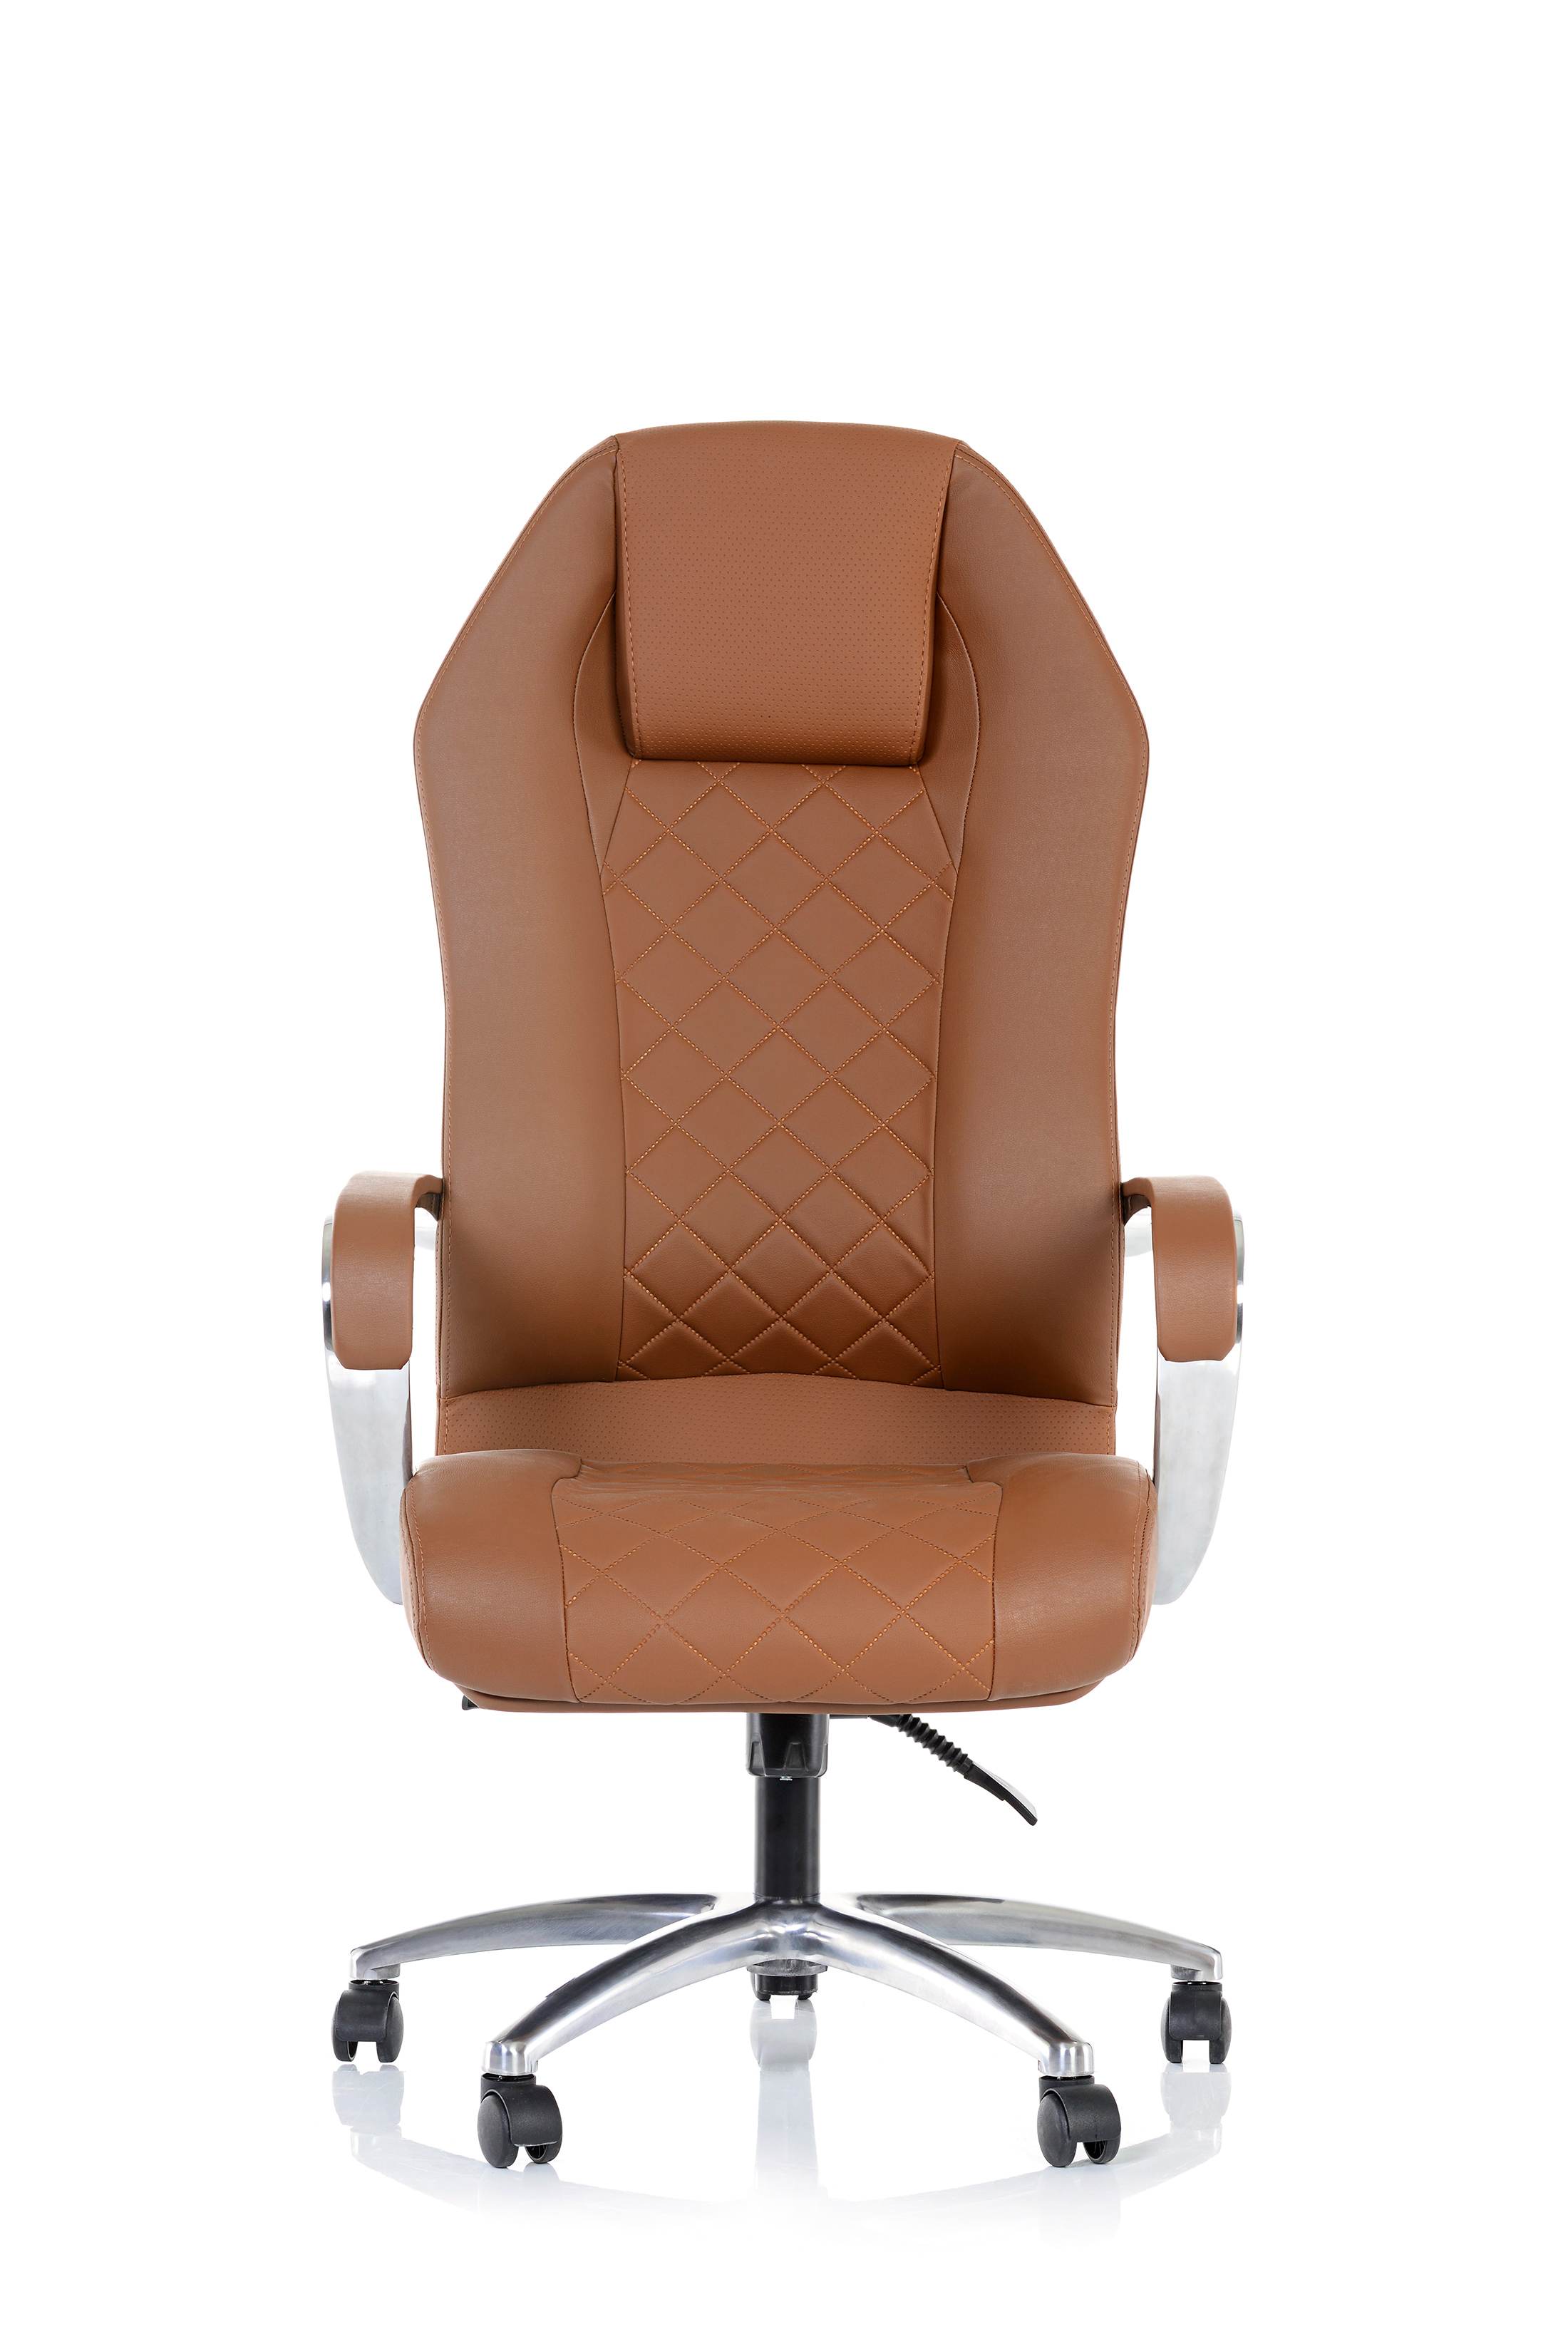 FORTE 000C MANAGER CHAIR